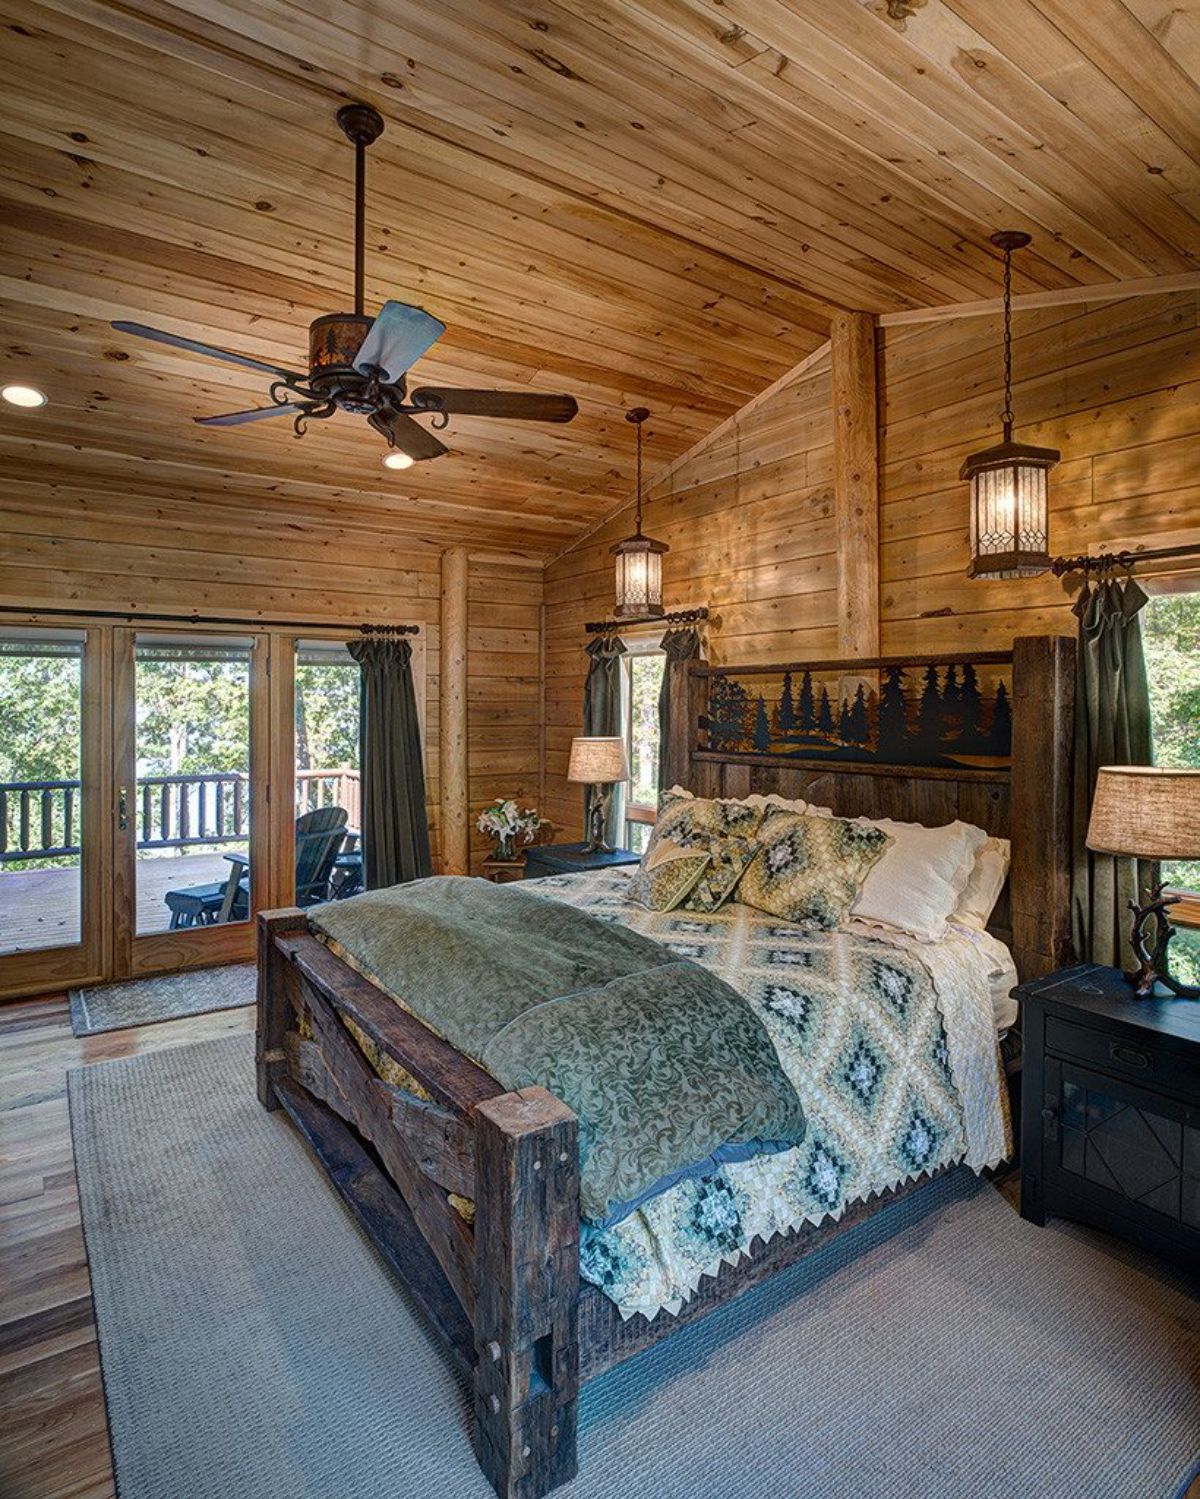 dark wood bed frame with green linens and glass door to patio on left